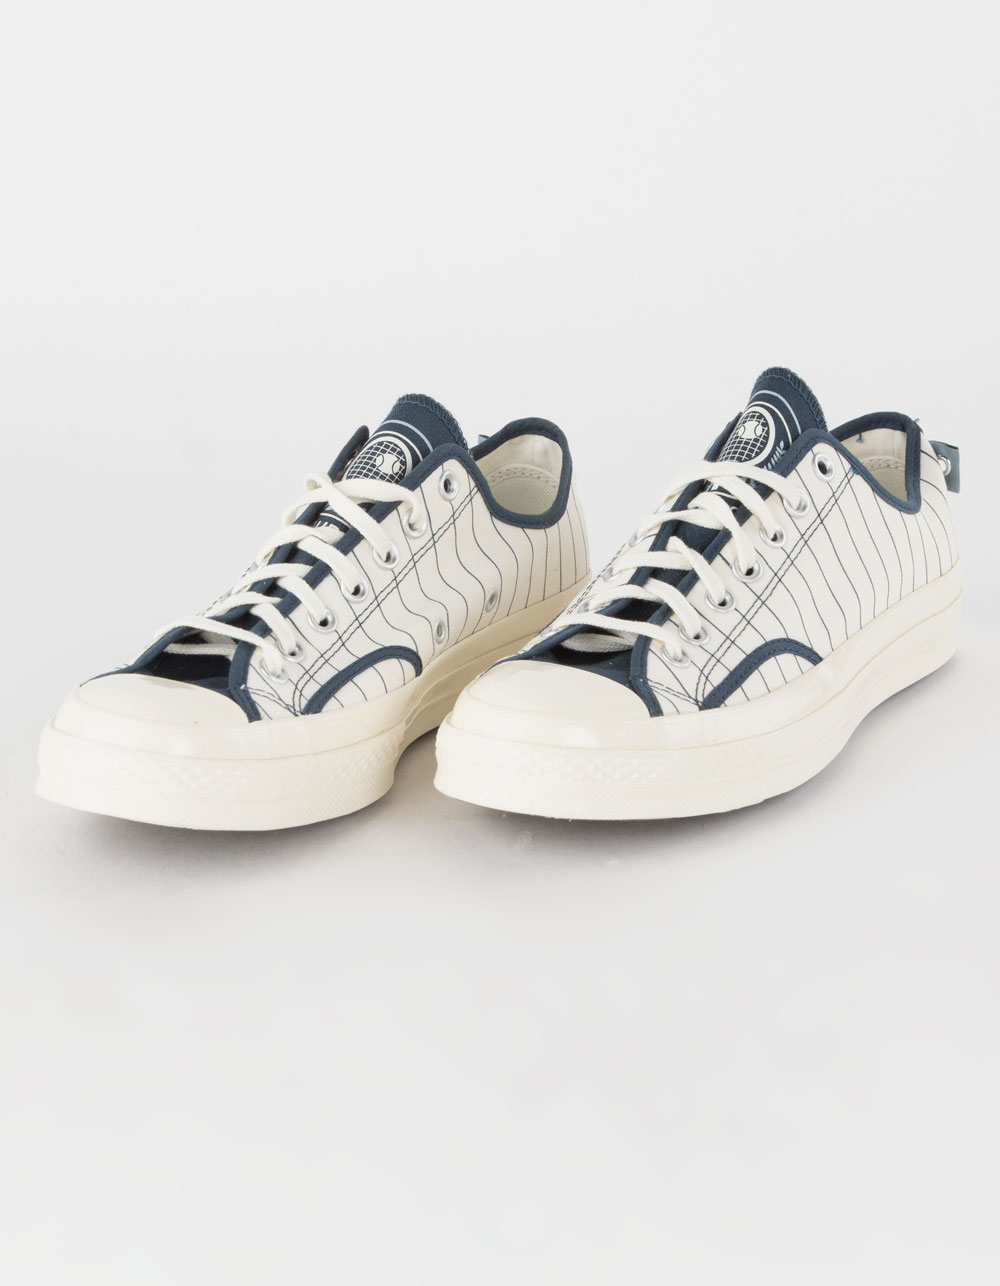 diefstal trainer Fabriek CONVERSE Chuck Taylor All Star 70 OX Clubhouse Low Top Shoes - WHT/BLUE |  Tillys